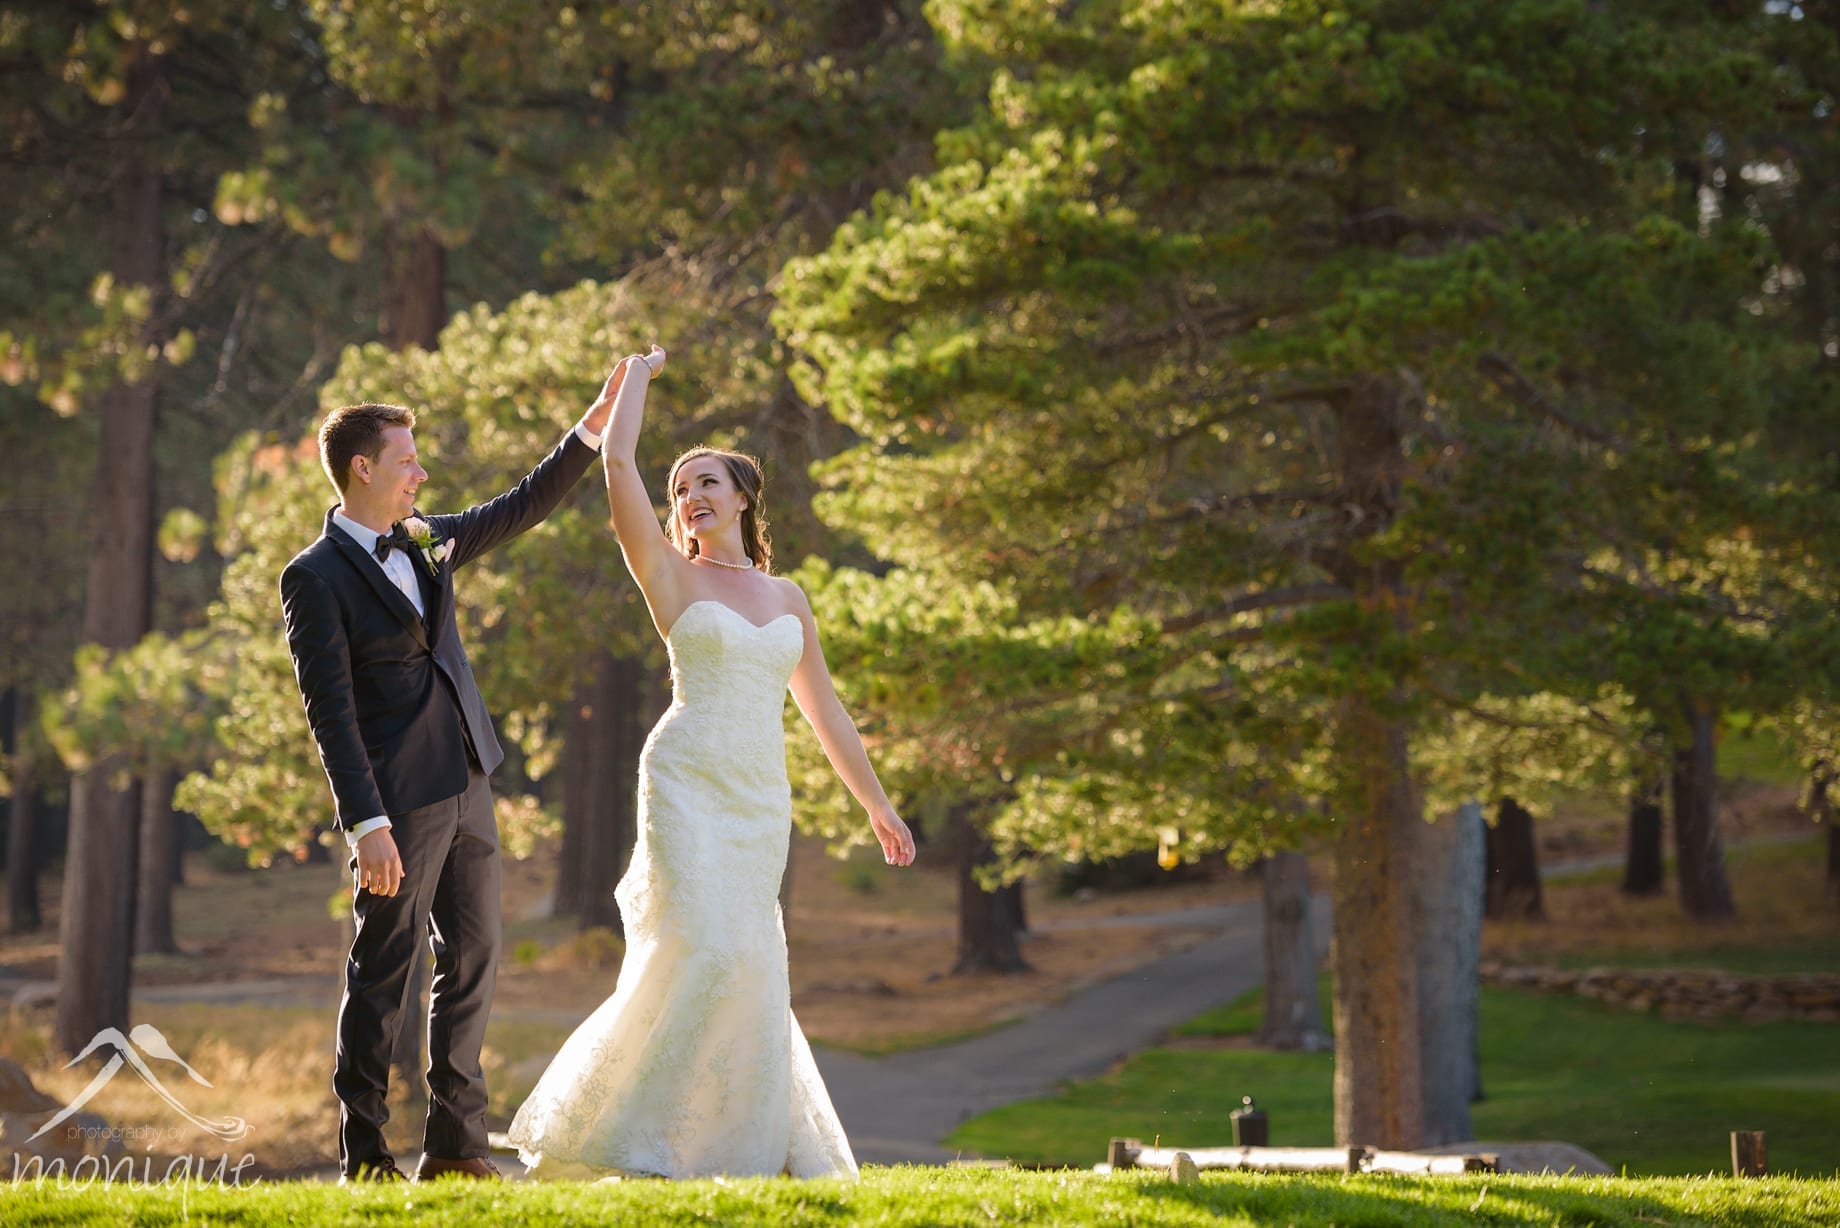 The Lodge at Tahoe Donner wedding photography with a bride and groom practicing their dance on the golf course green by Photography by Monique specializing in documentary style wedding photojournalism